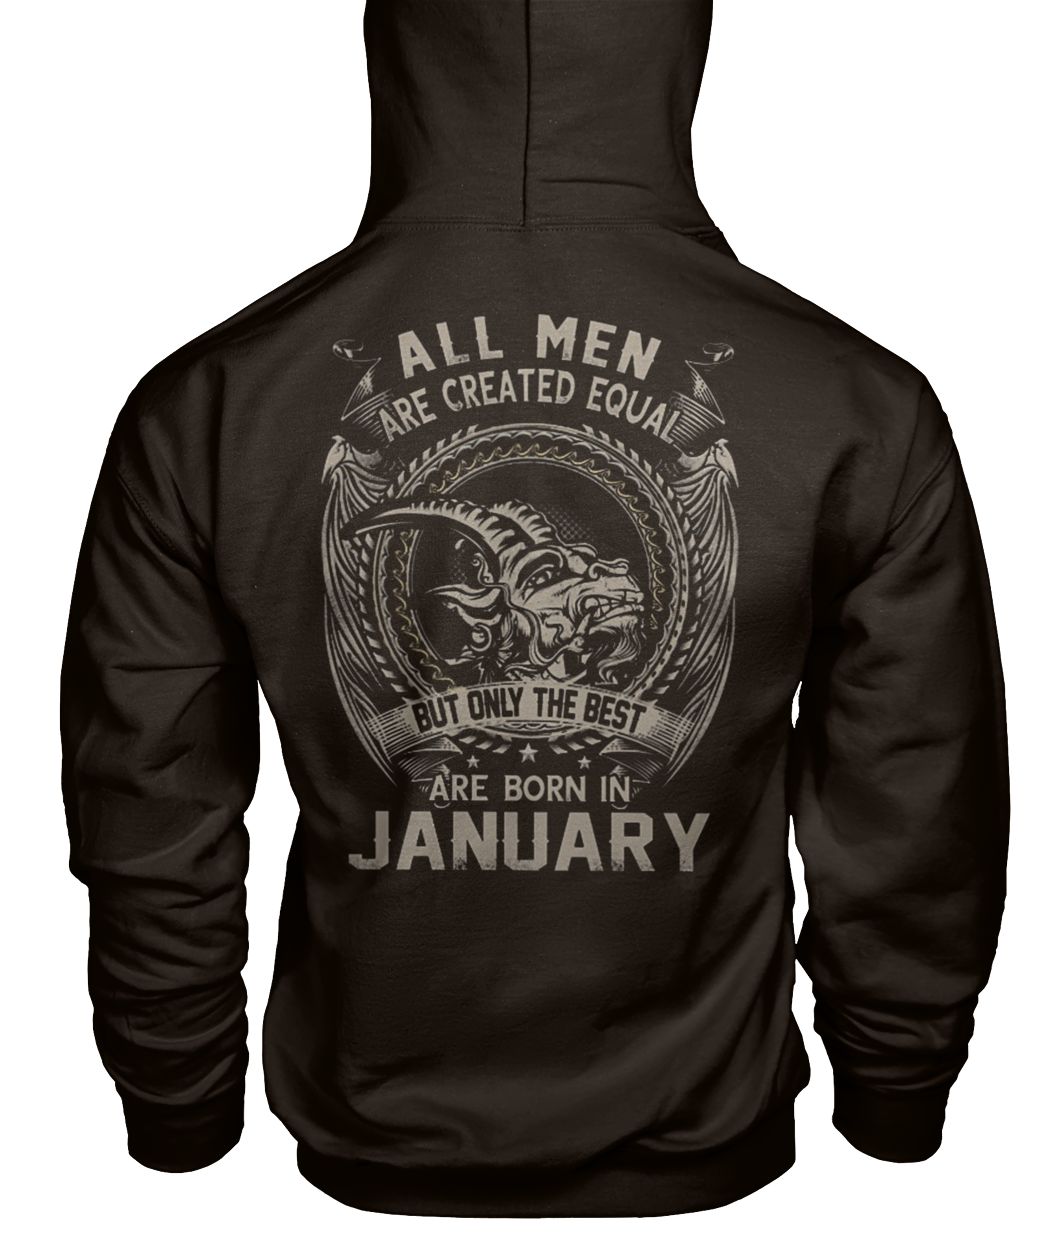 All men created equal but the best are born in january gildan hoodie